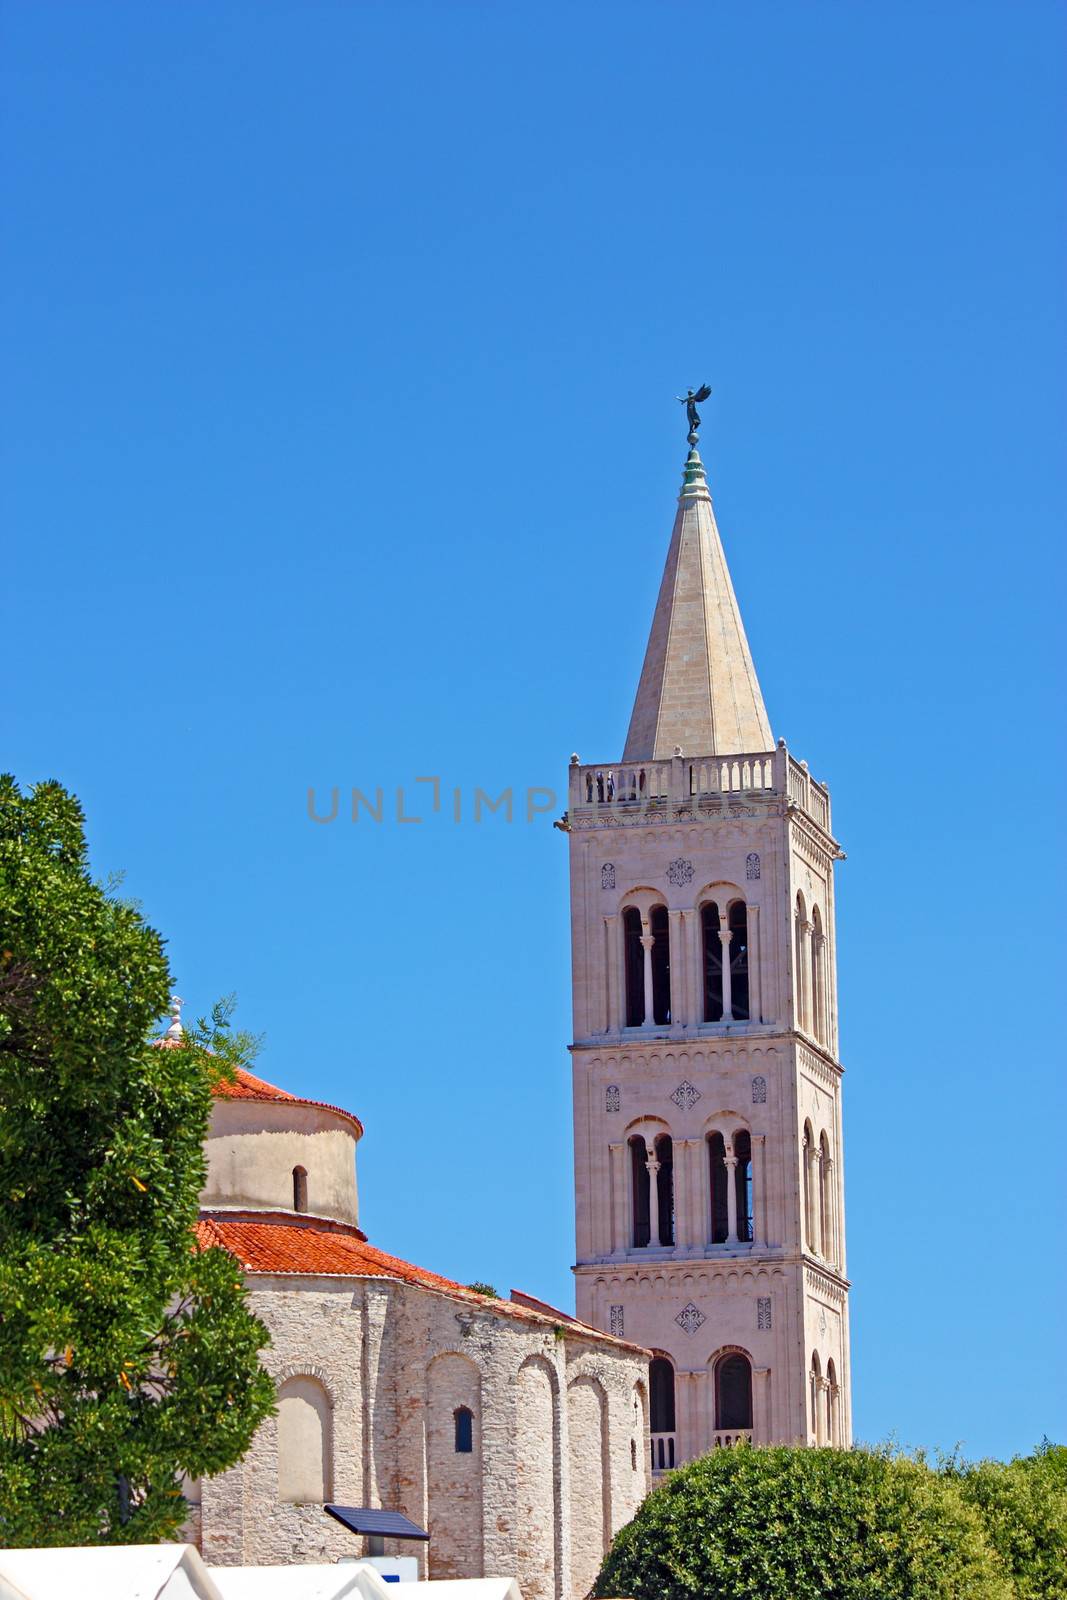 Church of St. Donat and tower of cathedral of St. Anastasia in Zadar, Croatia from 9th century